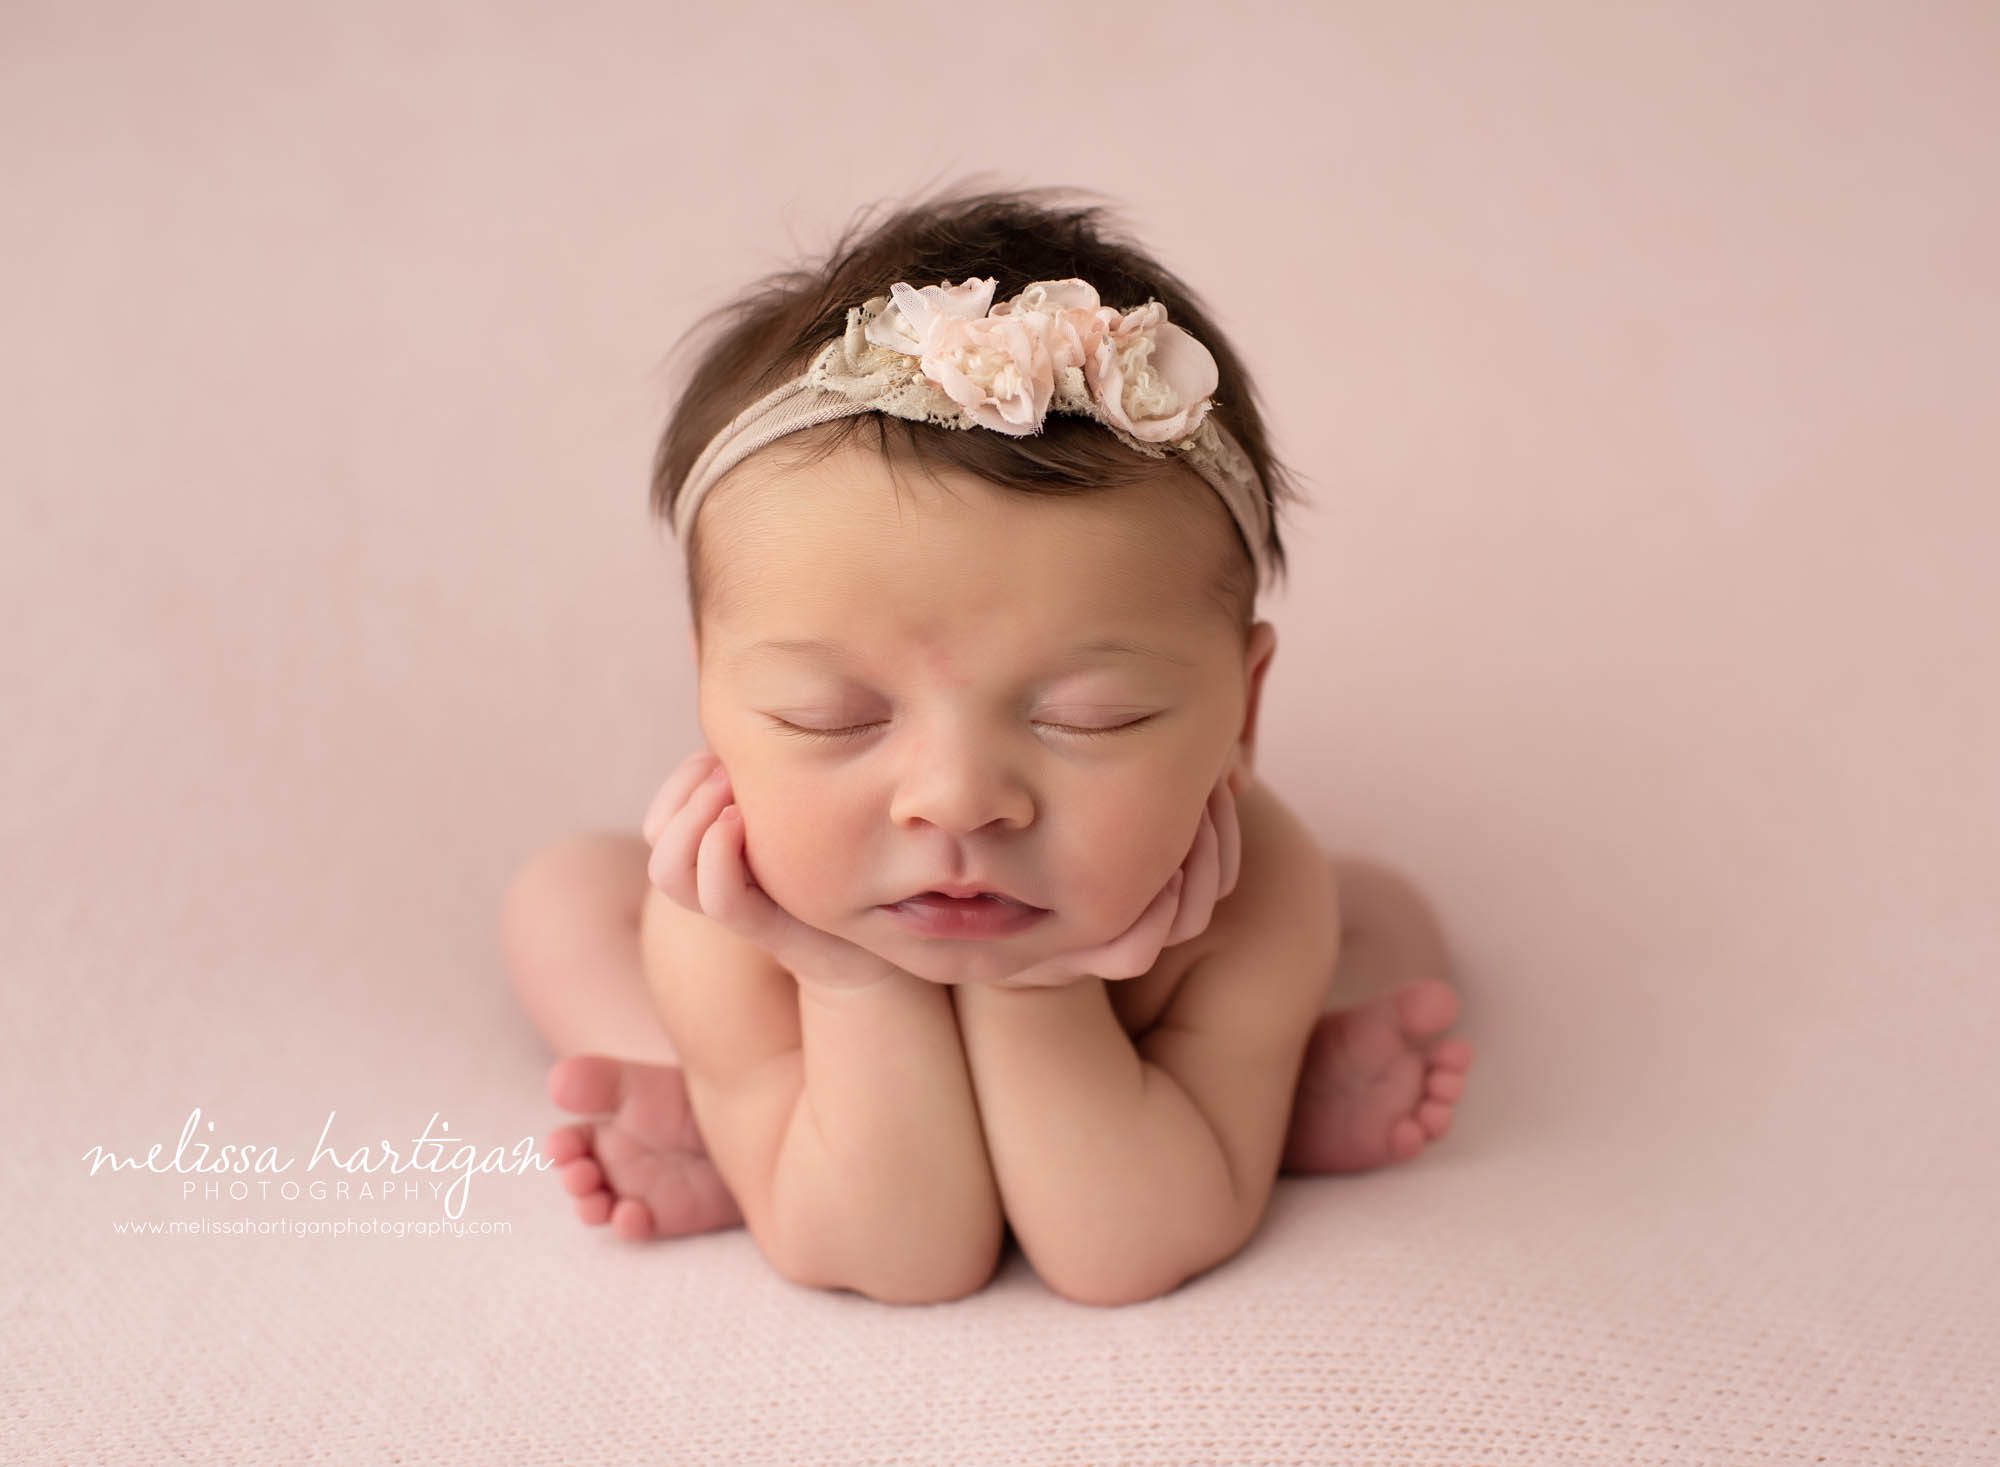 Baby girl posed froggy pose on pink backdrop with pink headband